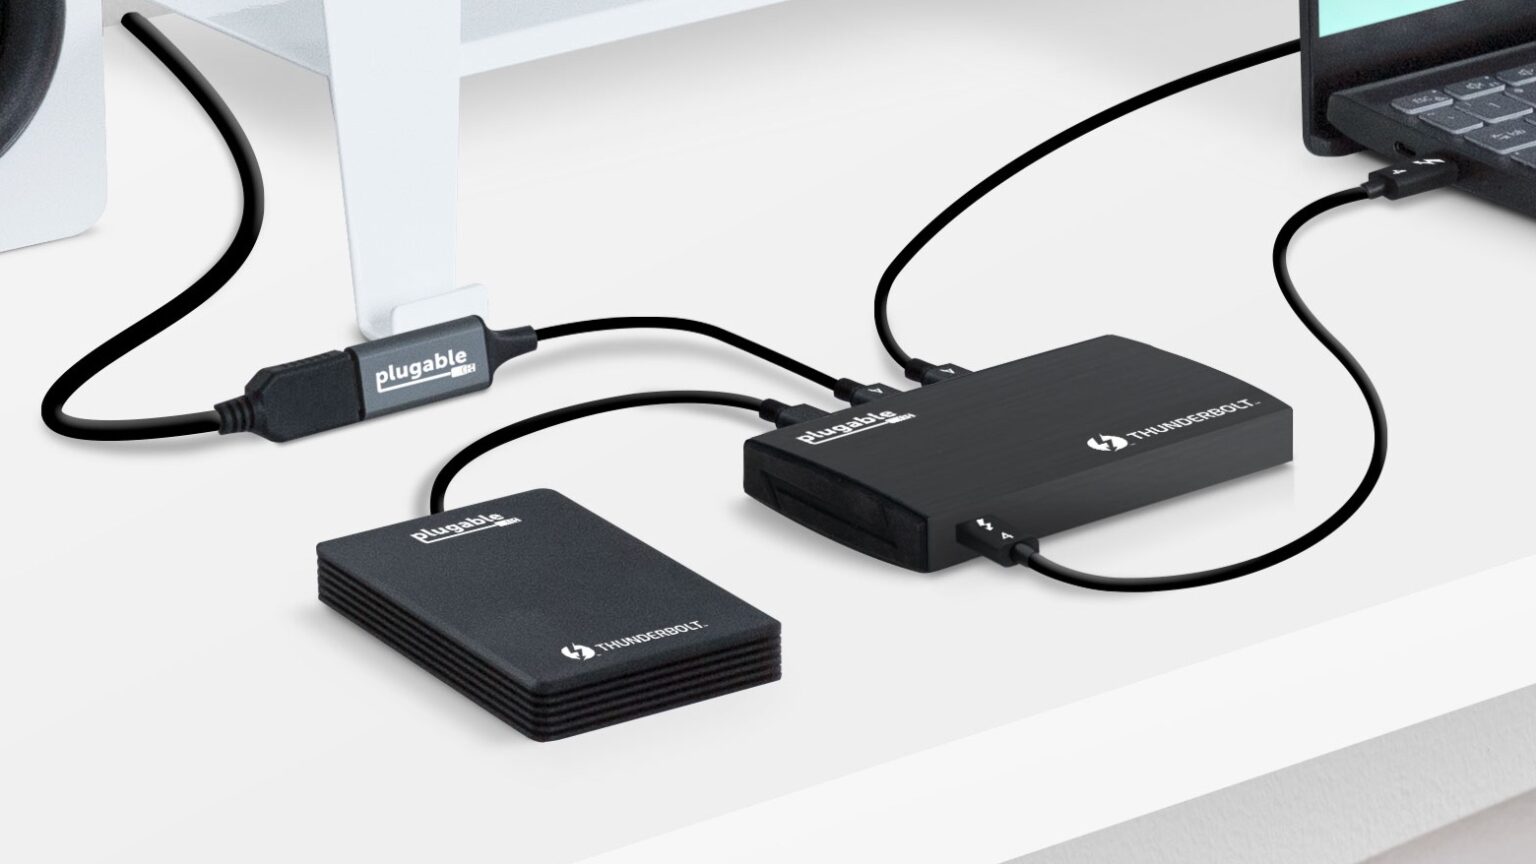 Add trio of blazing-fast ports to your Mac with new Plugable Thunderbolt 4 hub